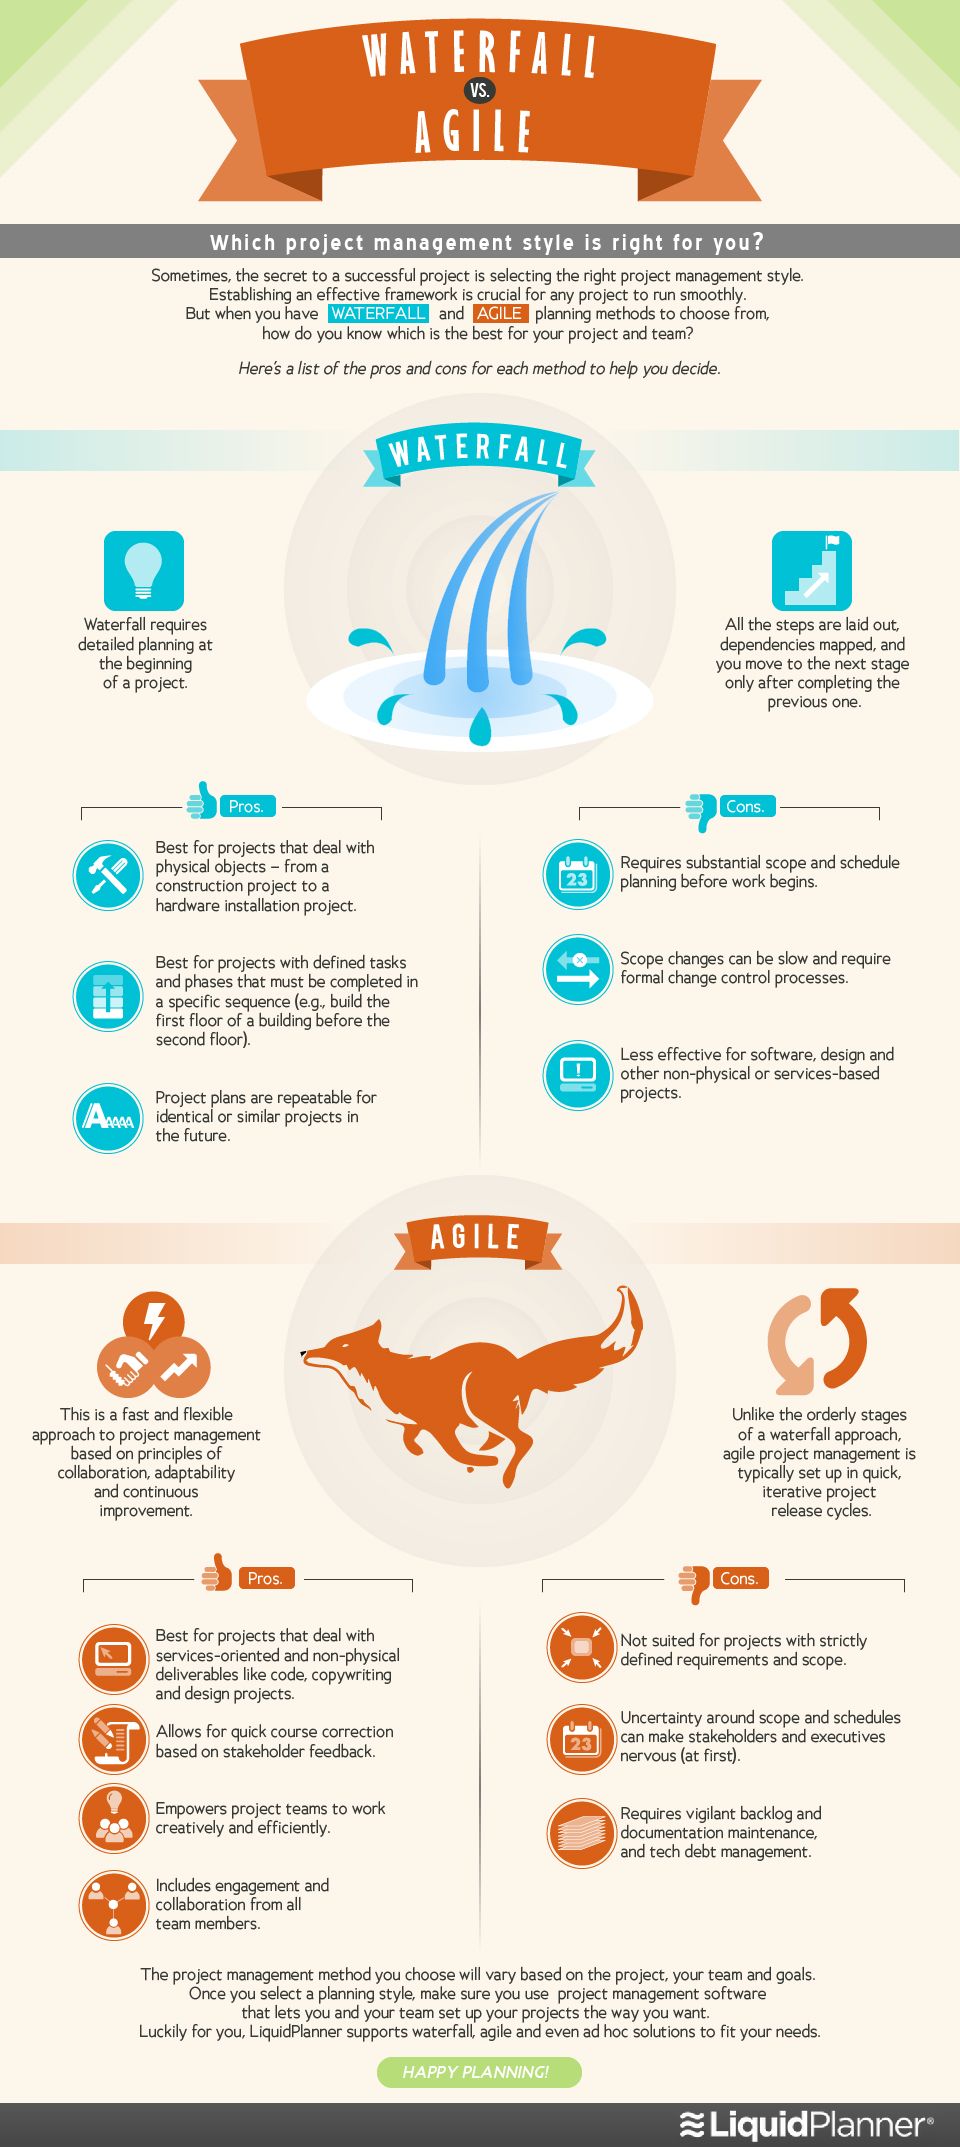 Infographic: Agile vs. Waterfall--Which Project Management Style Is Right for You?